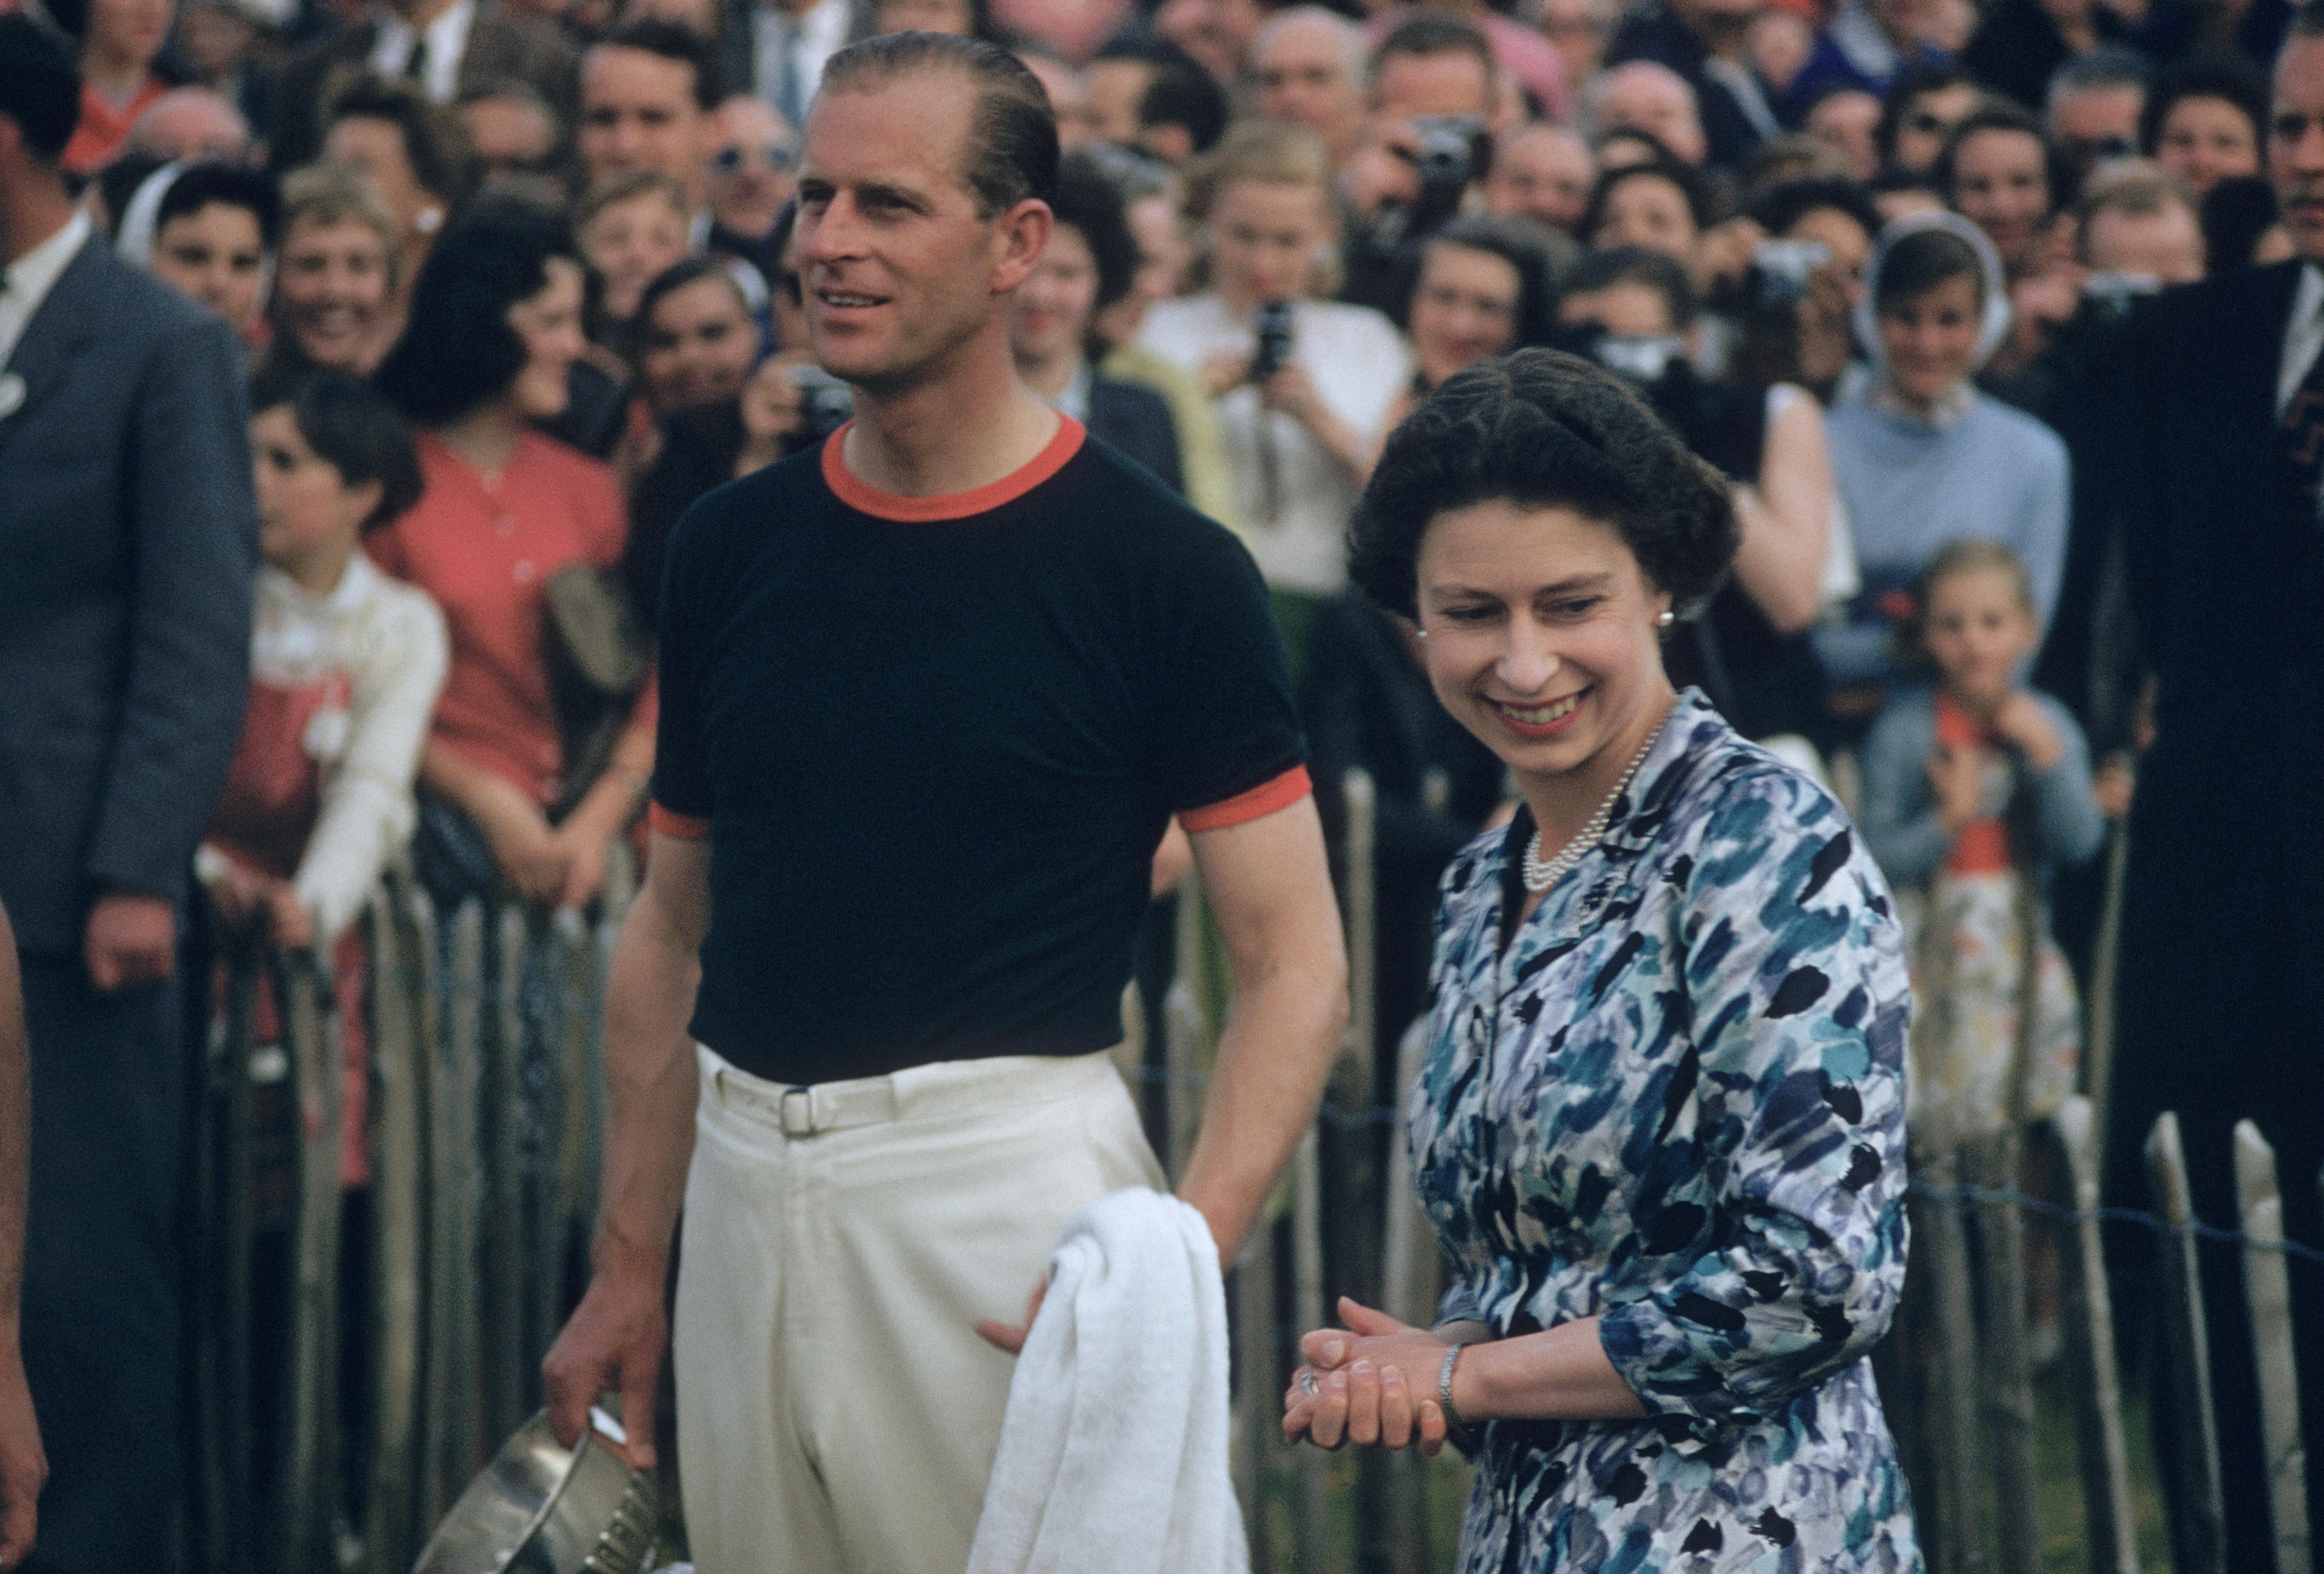 1955: Prince Philip, captain of the Windsor Park Team, with the Windsor Cup after his team beat India during the Ascot week Polo tournament of which he is sponsor.The cup was presented by Queen Elizabeth II who is at his side.

Signed in black ink